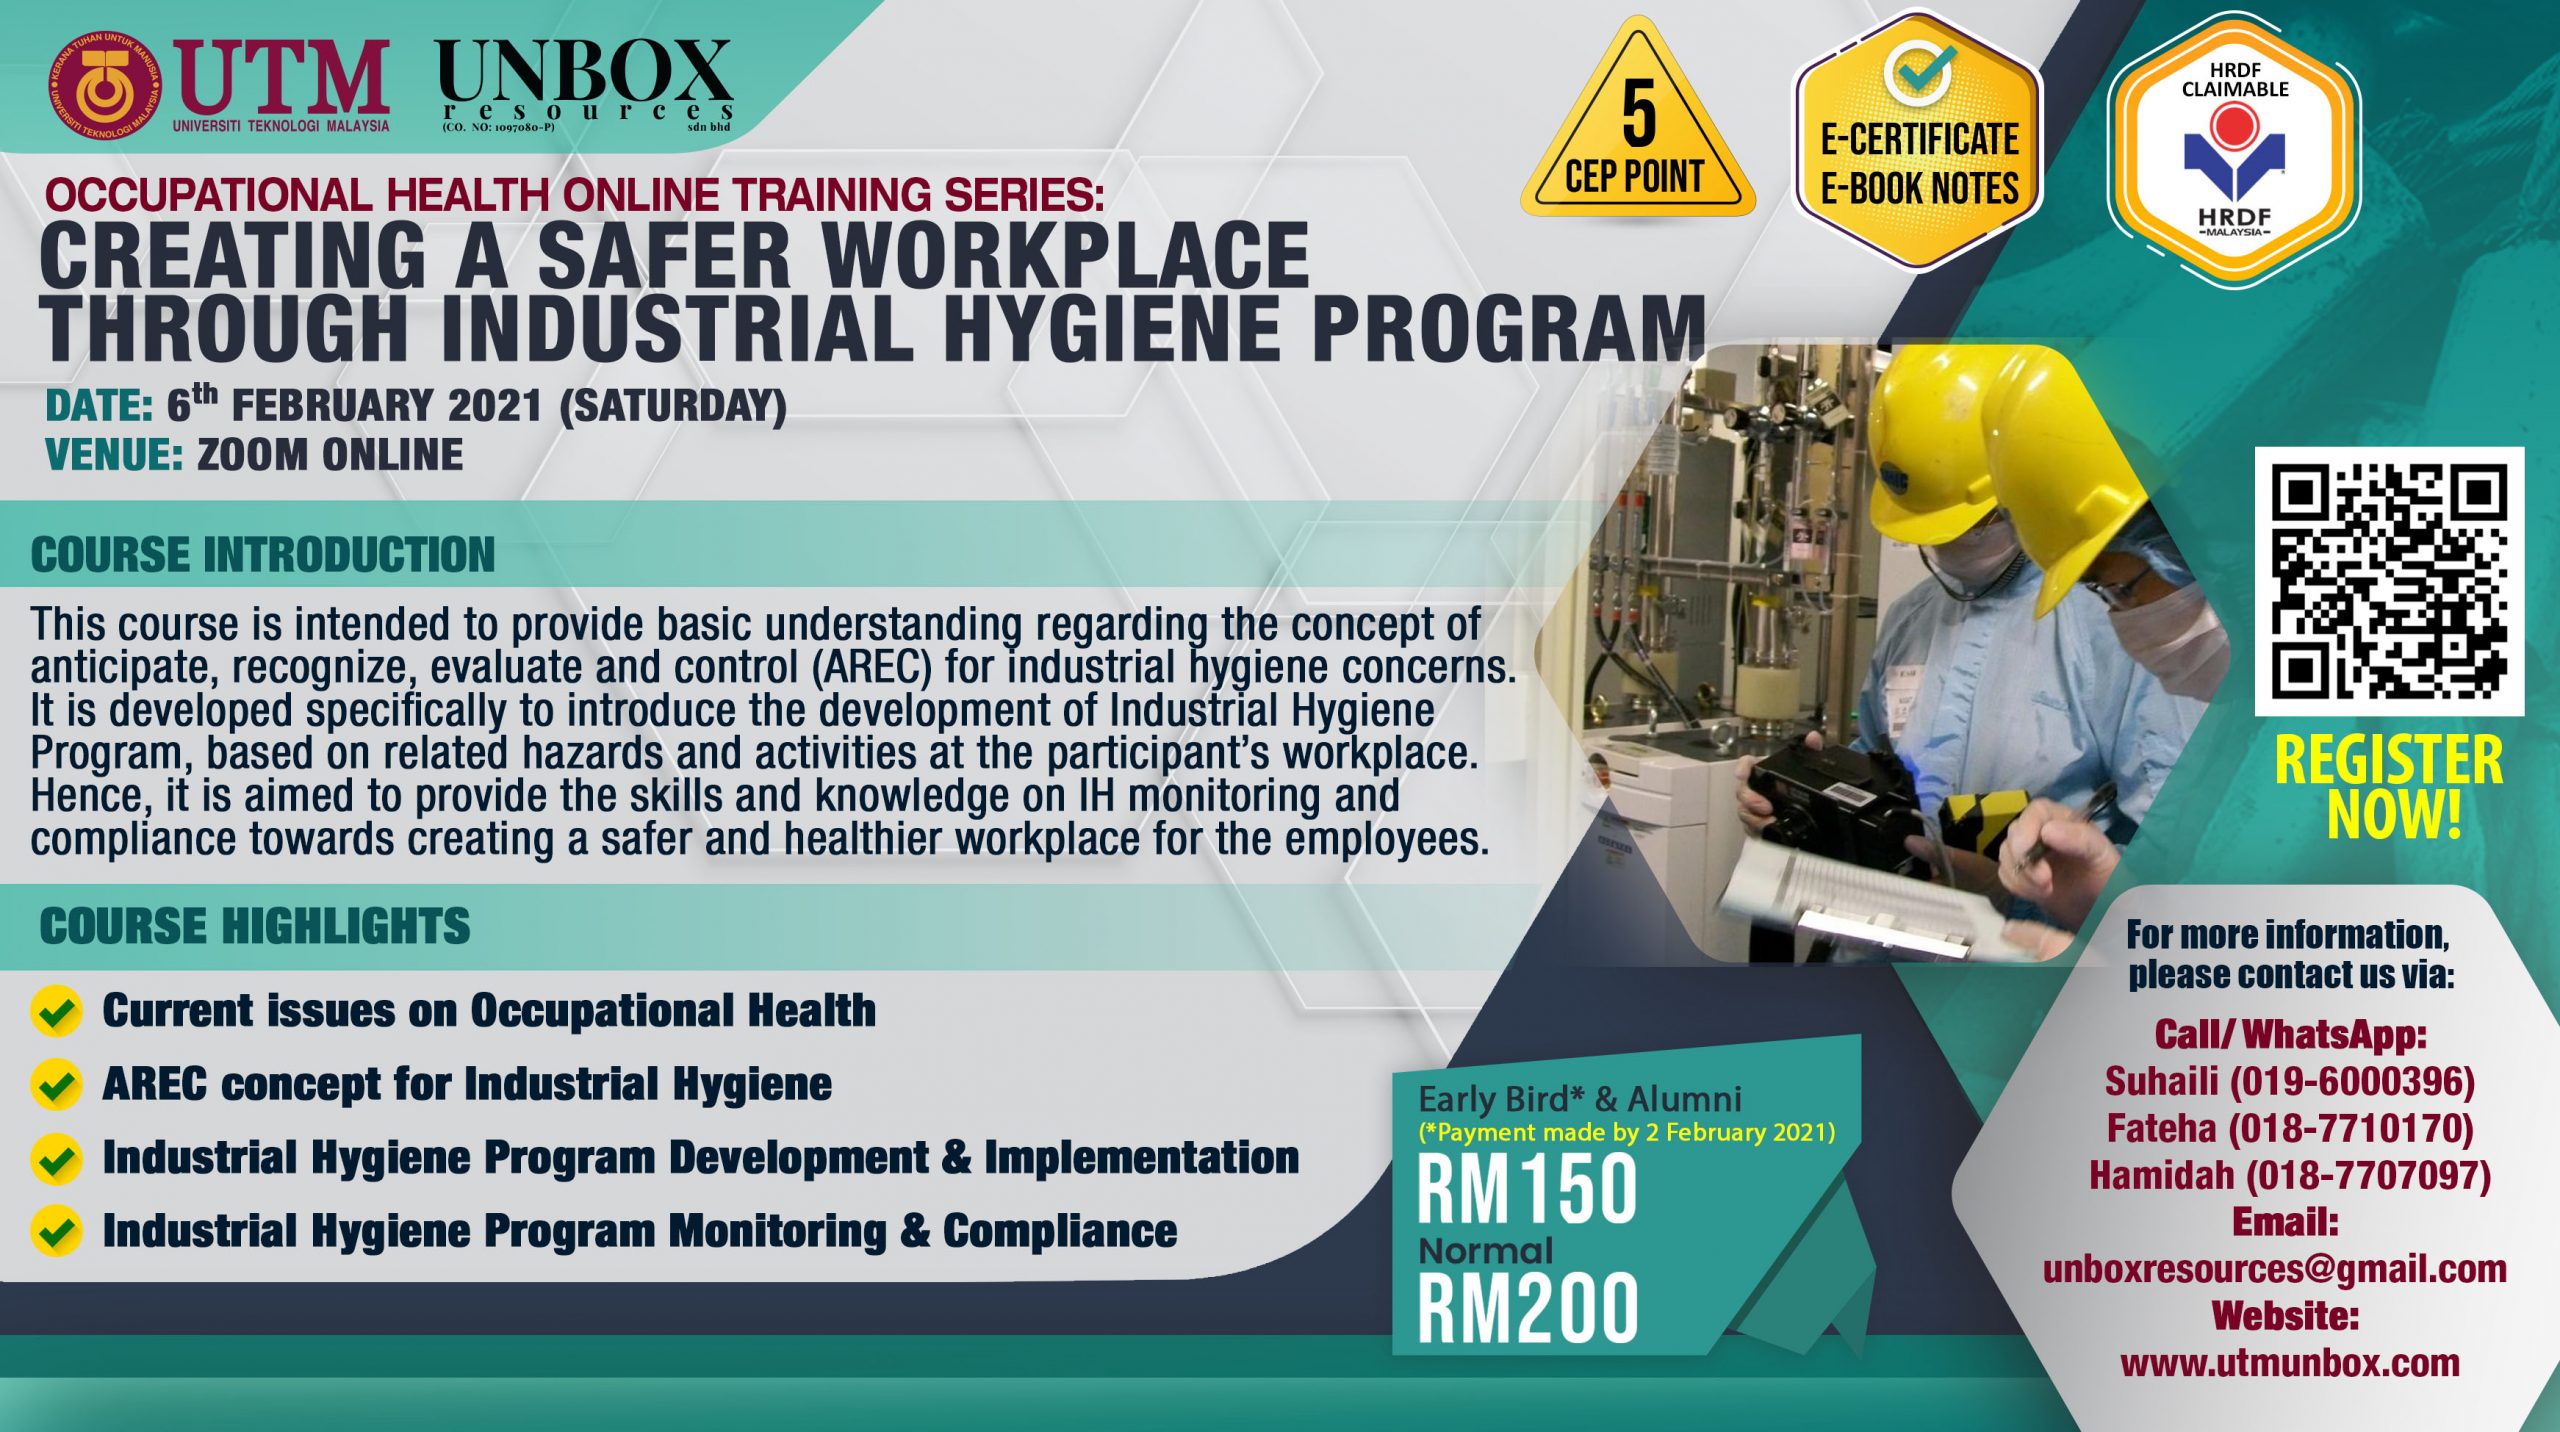 You are currently viewing COMPLETED: ONLINE CEP COURSE: UTM-UNBOX OCCUPATIONAL HEALTH ONLINE TRAINING SERIES: CREATING A SAFER WORKPLACE THROUGH INDUSTRIAL HYGIENE PROGRAM (6 FEBRUARY 2021, ZOOM ONLINE)